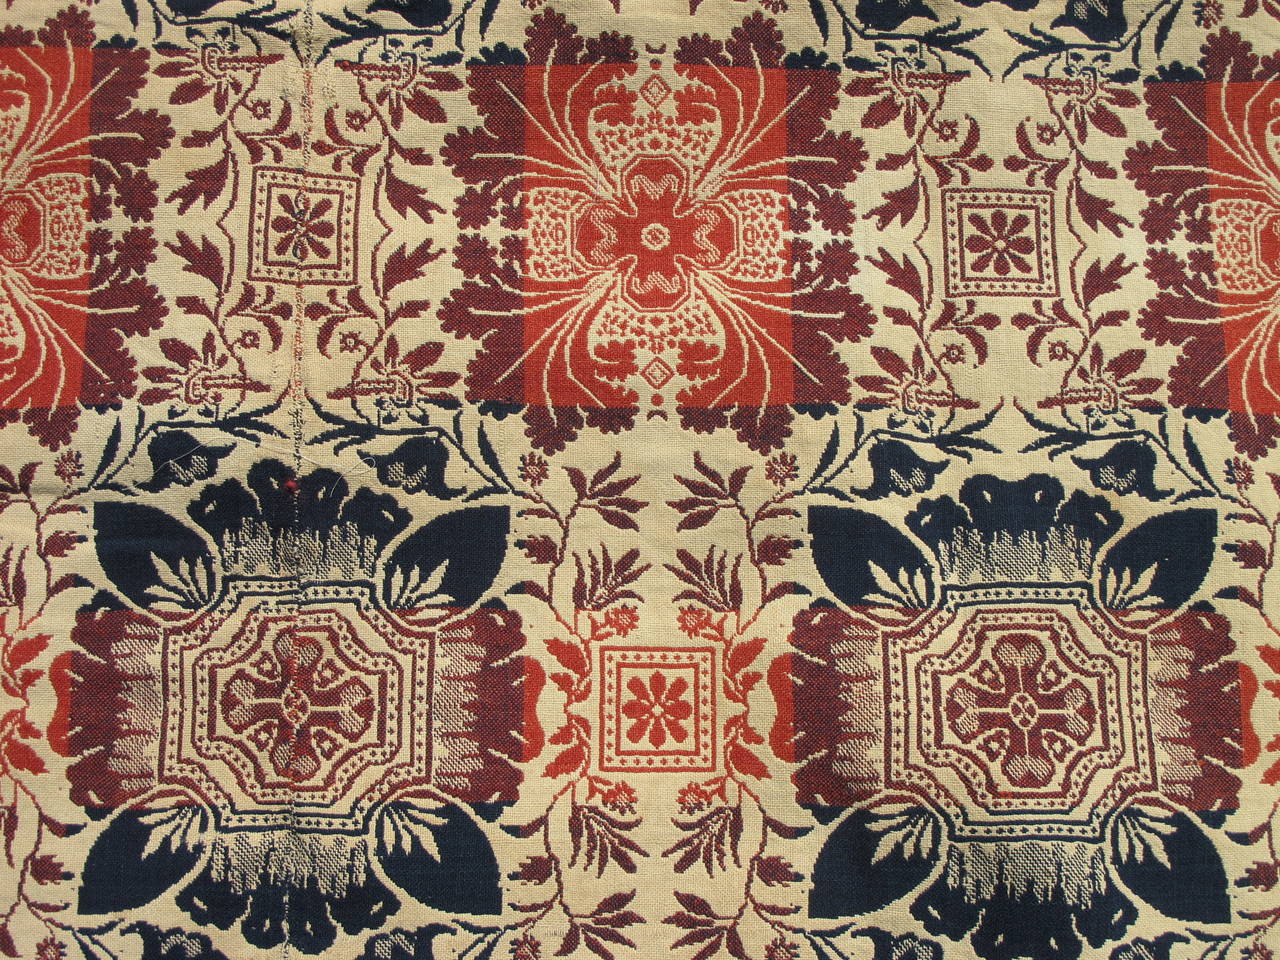 19th Century American Coverlet In Good Condition For Sale In Yardley, PA